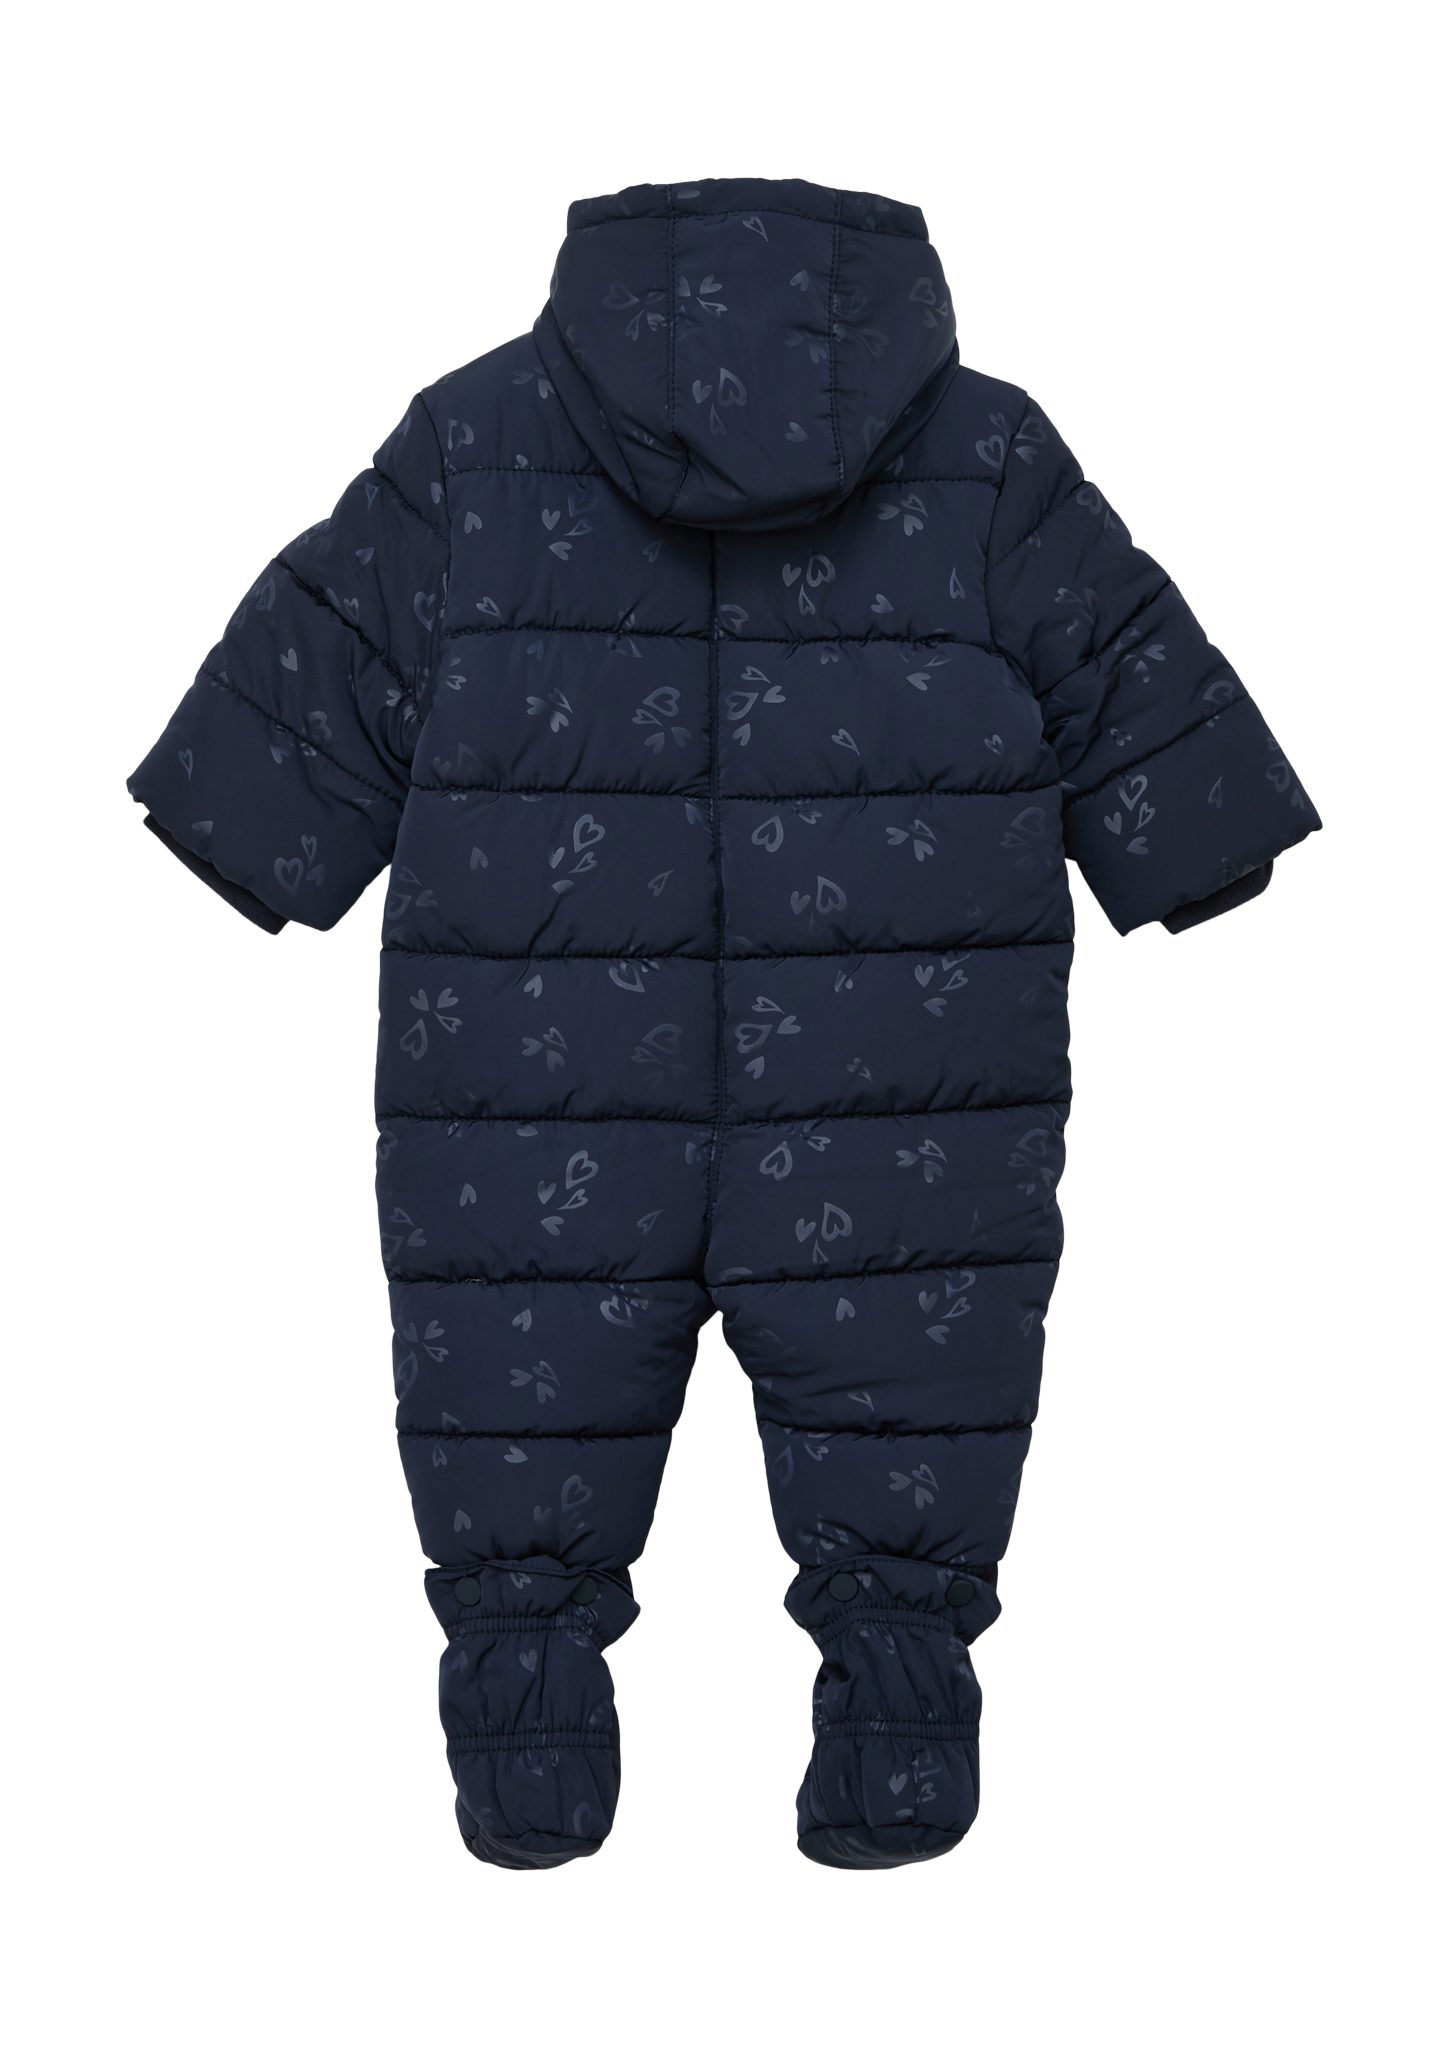 abnehmbaren Schuhen Baby-Overall mit Overall s.Oliver Schleife